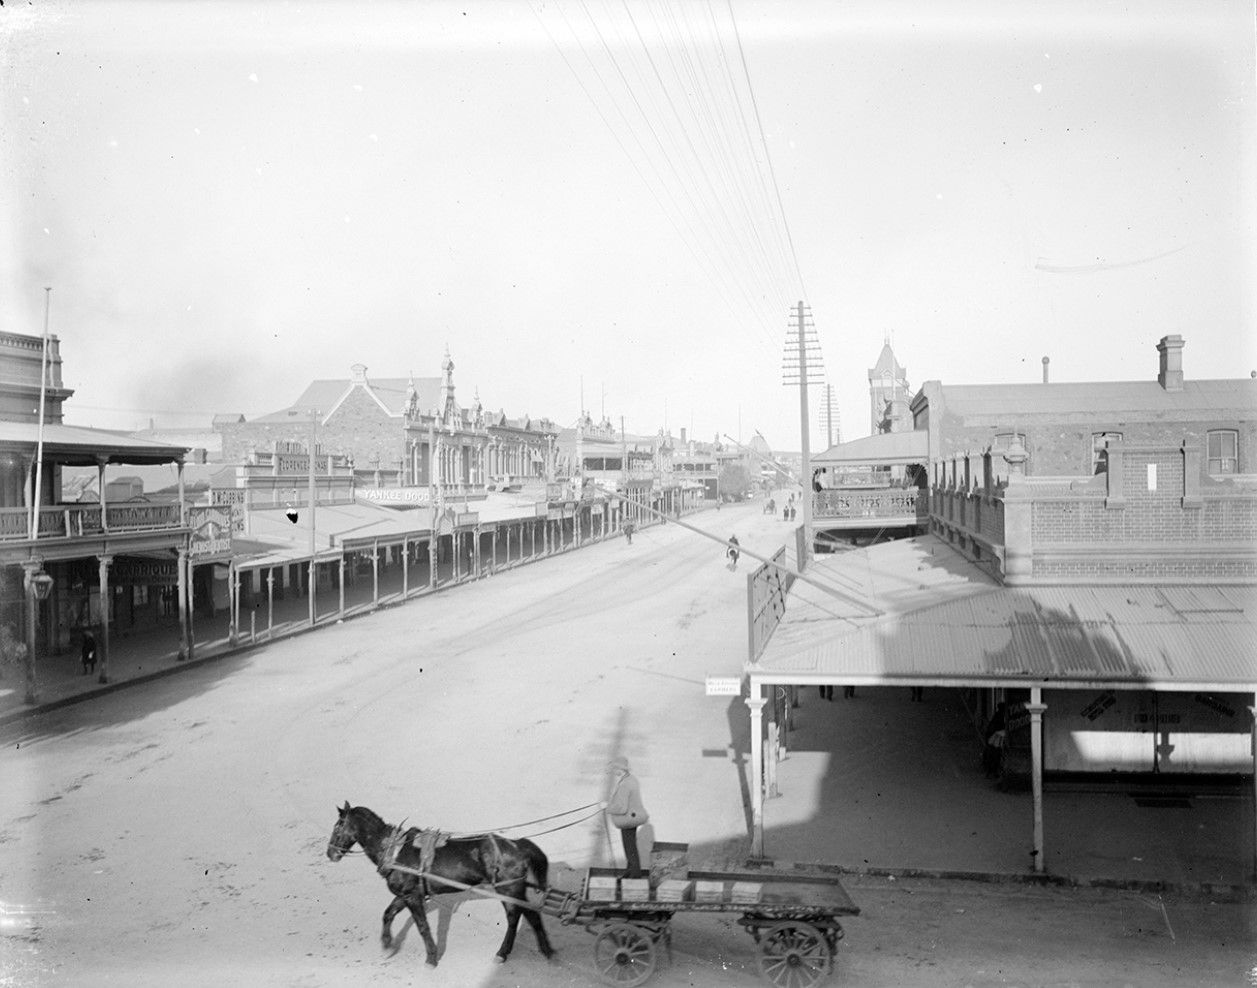 Man standing on wagon of horse drawn cart turns onto the main street of Broken Hill 1903. 